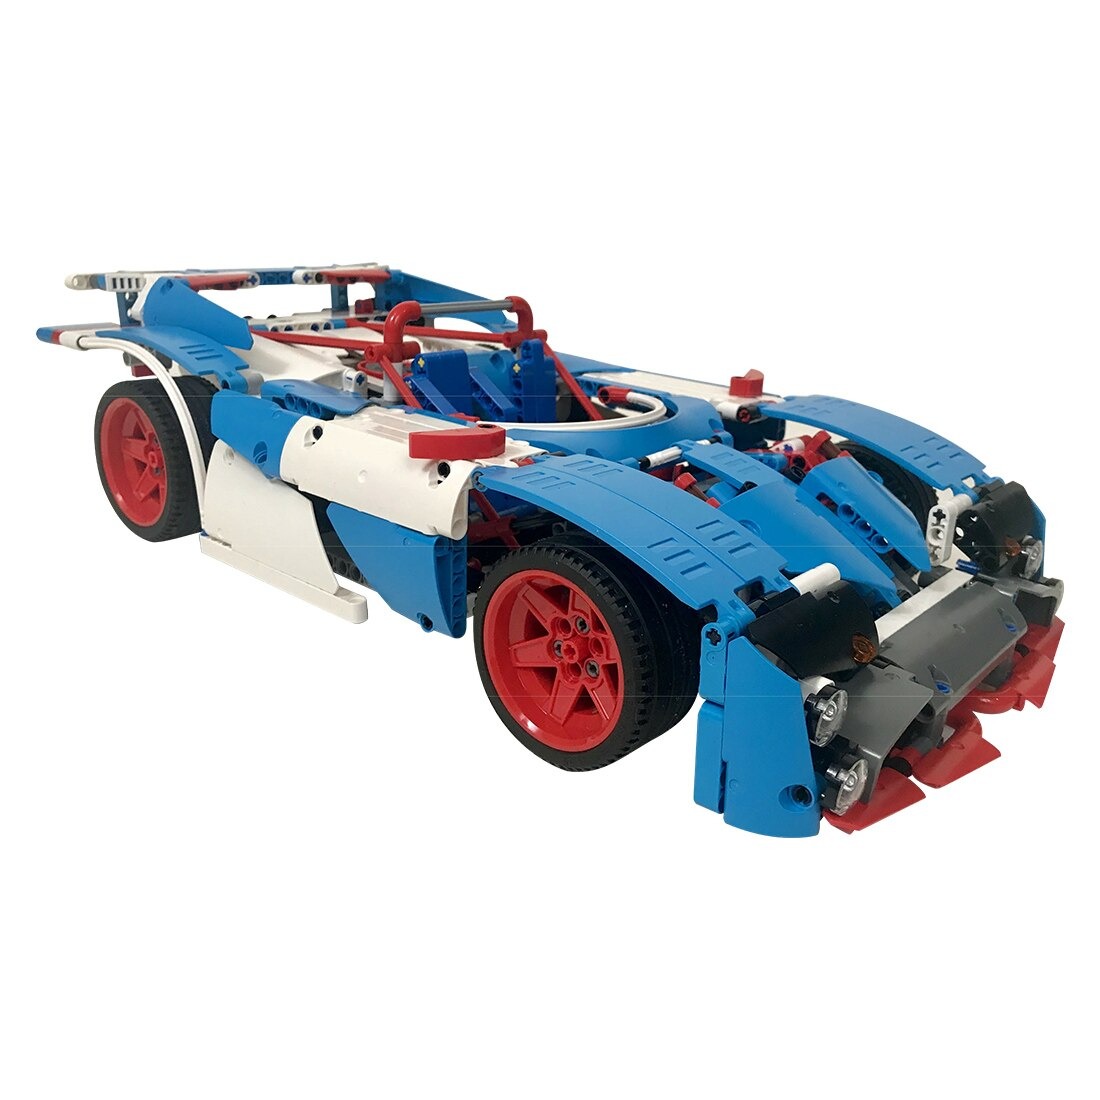 authorized moc 12233 rally car technic m main 0 - MOULD KING